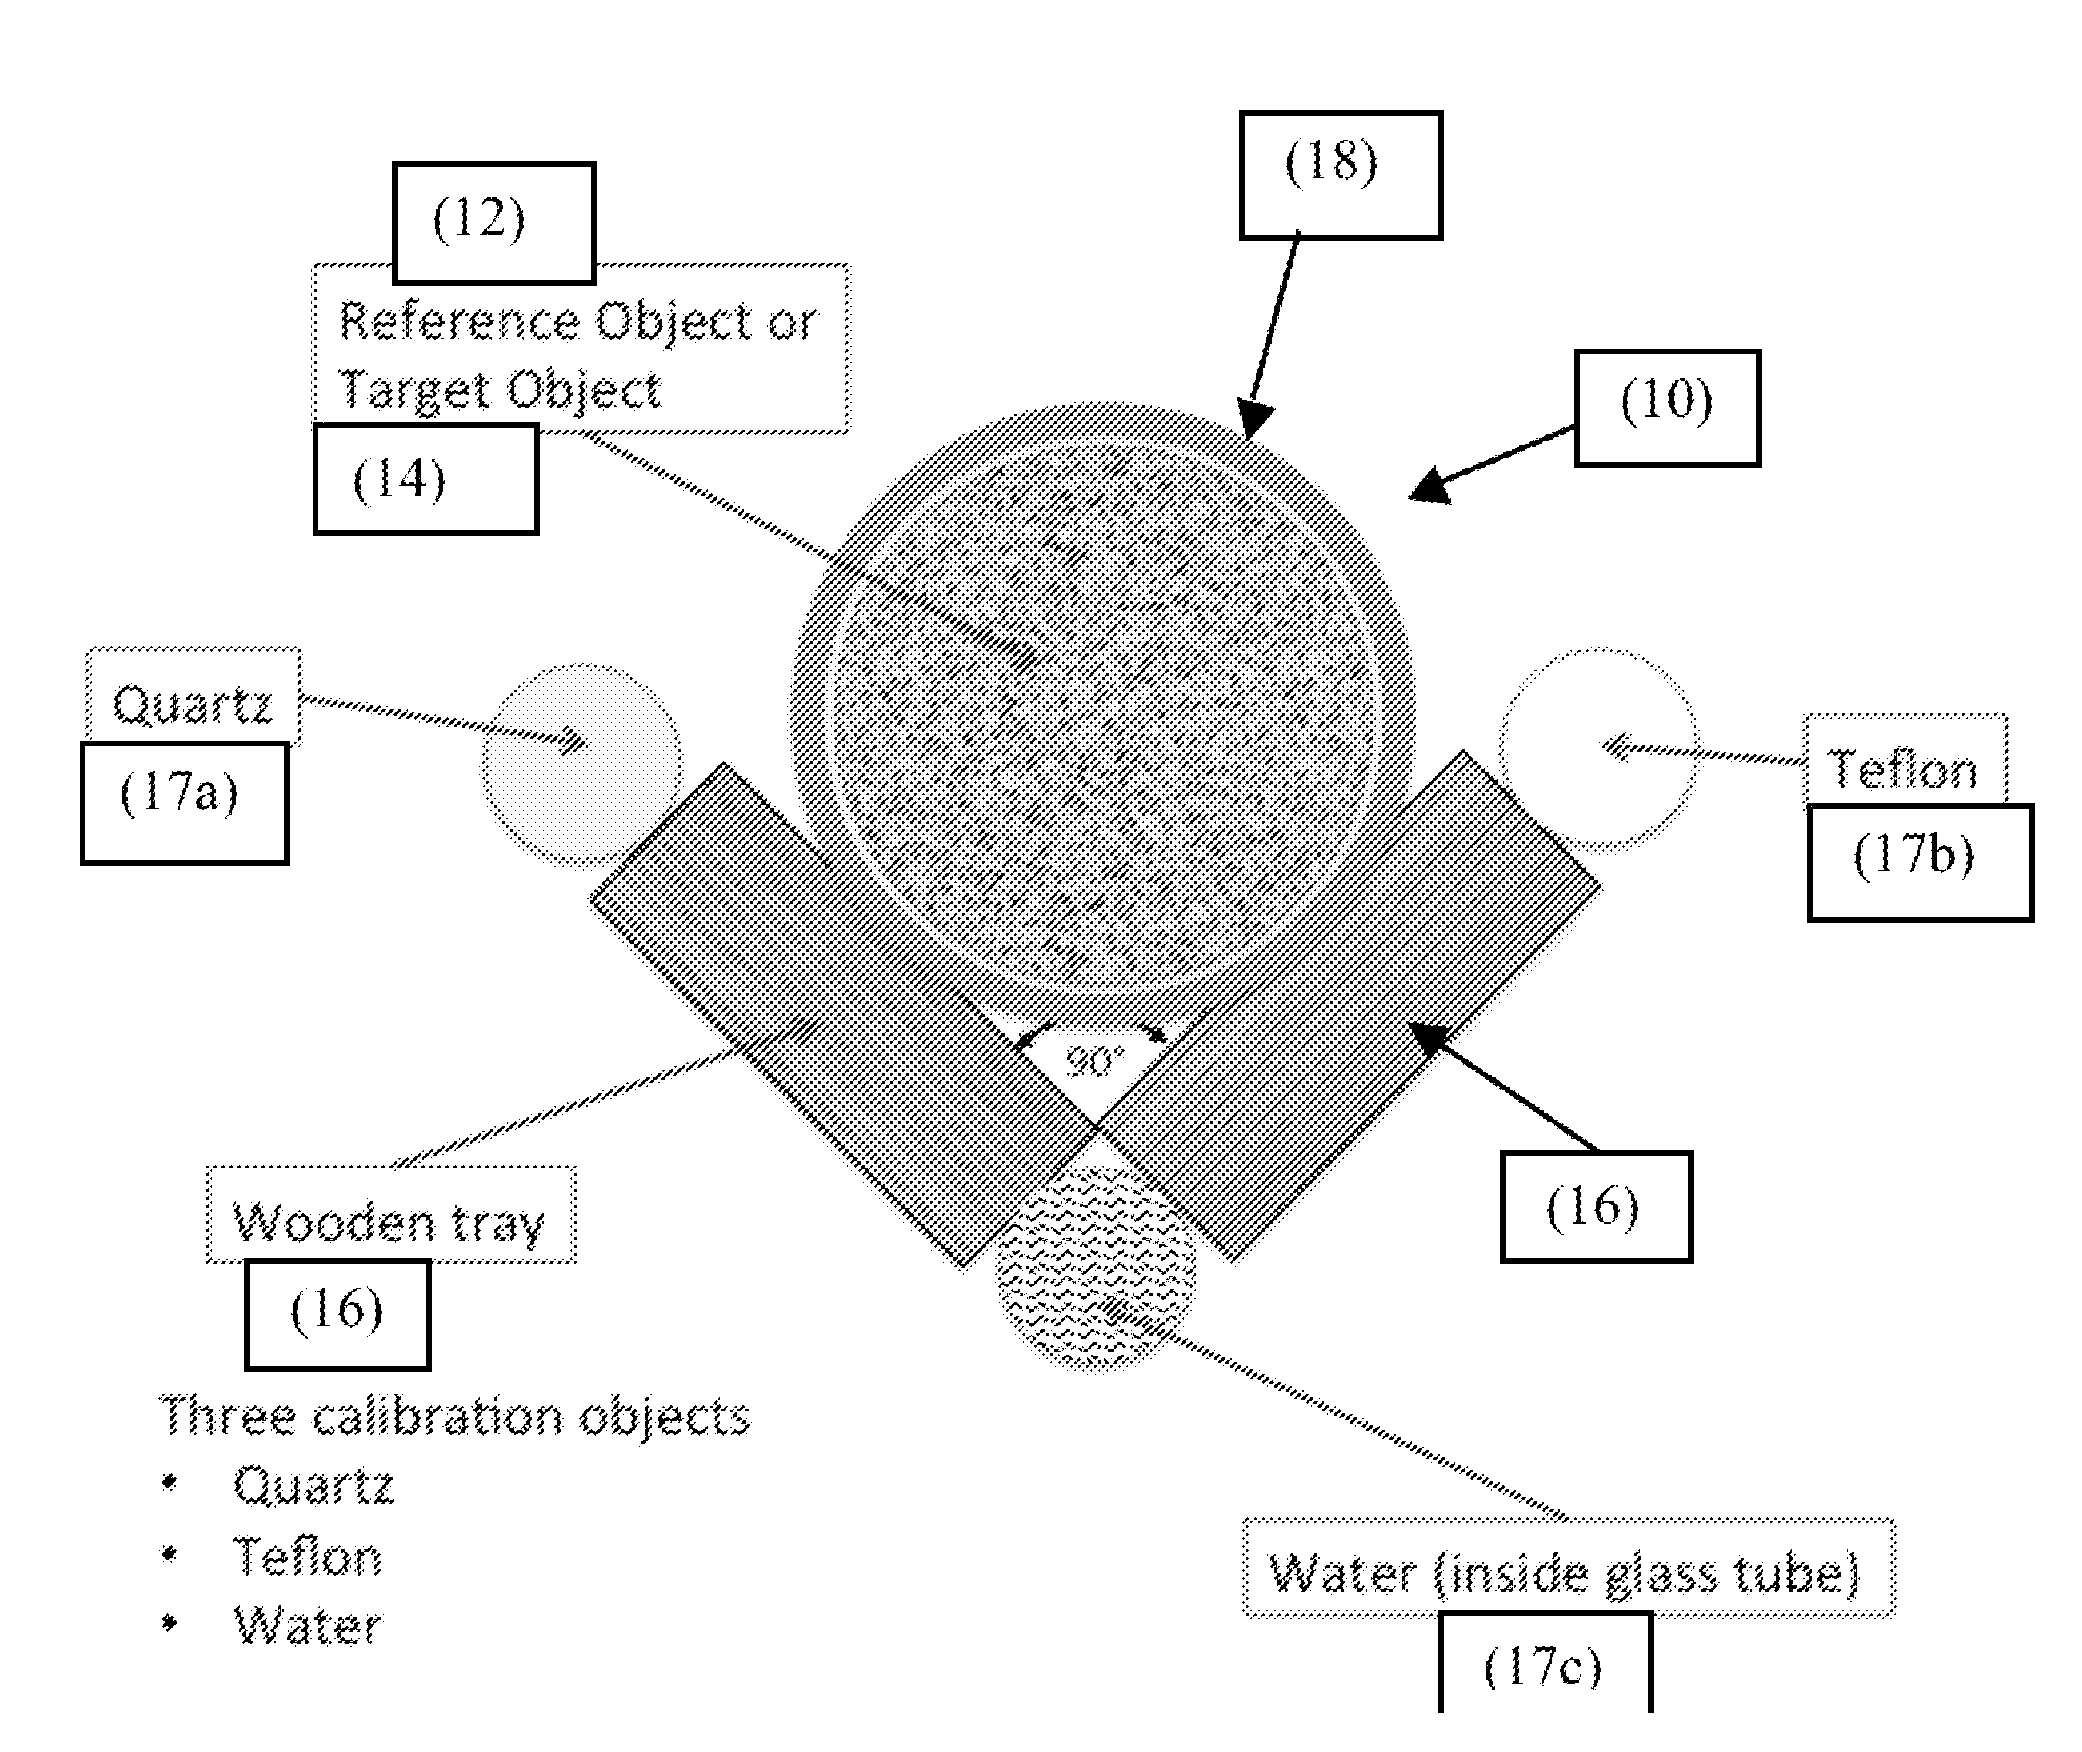 Method For Estimating Effective Atomic Number And Bulk Density Of Rock Samples Using Dual Energy X-Ray Computed Tomographic Imaging